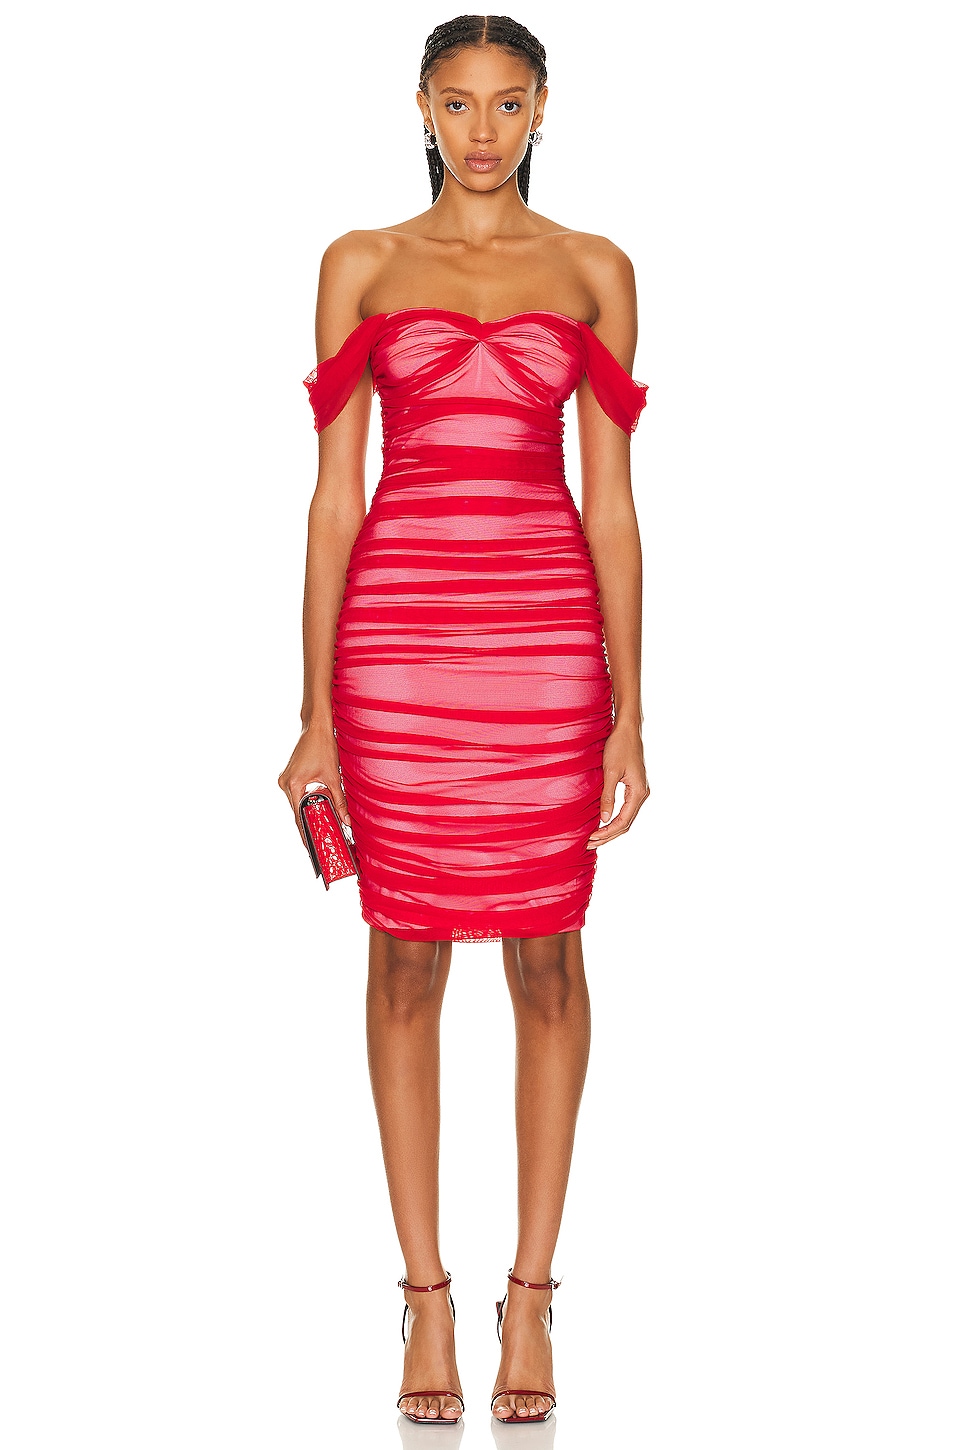 Norma Kamali Walter Dress in Tiger Red & Snow White | FWRD